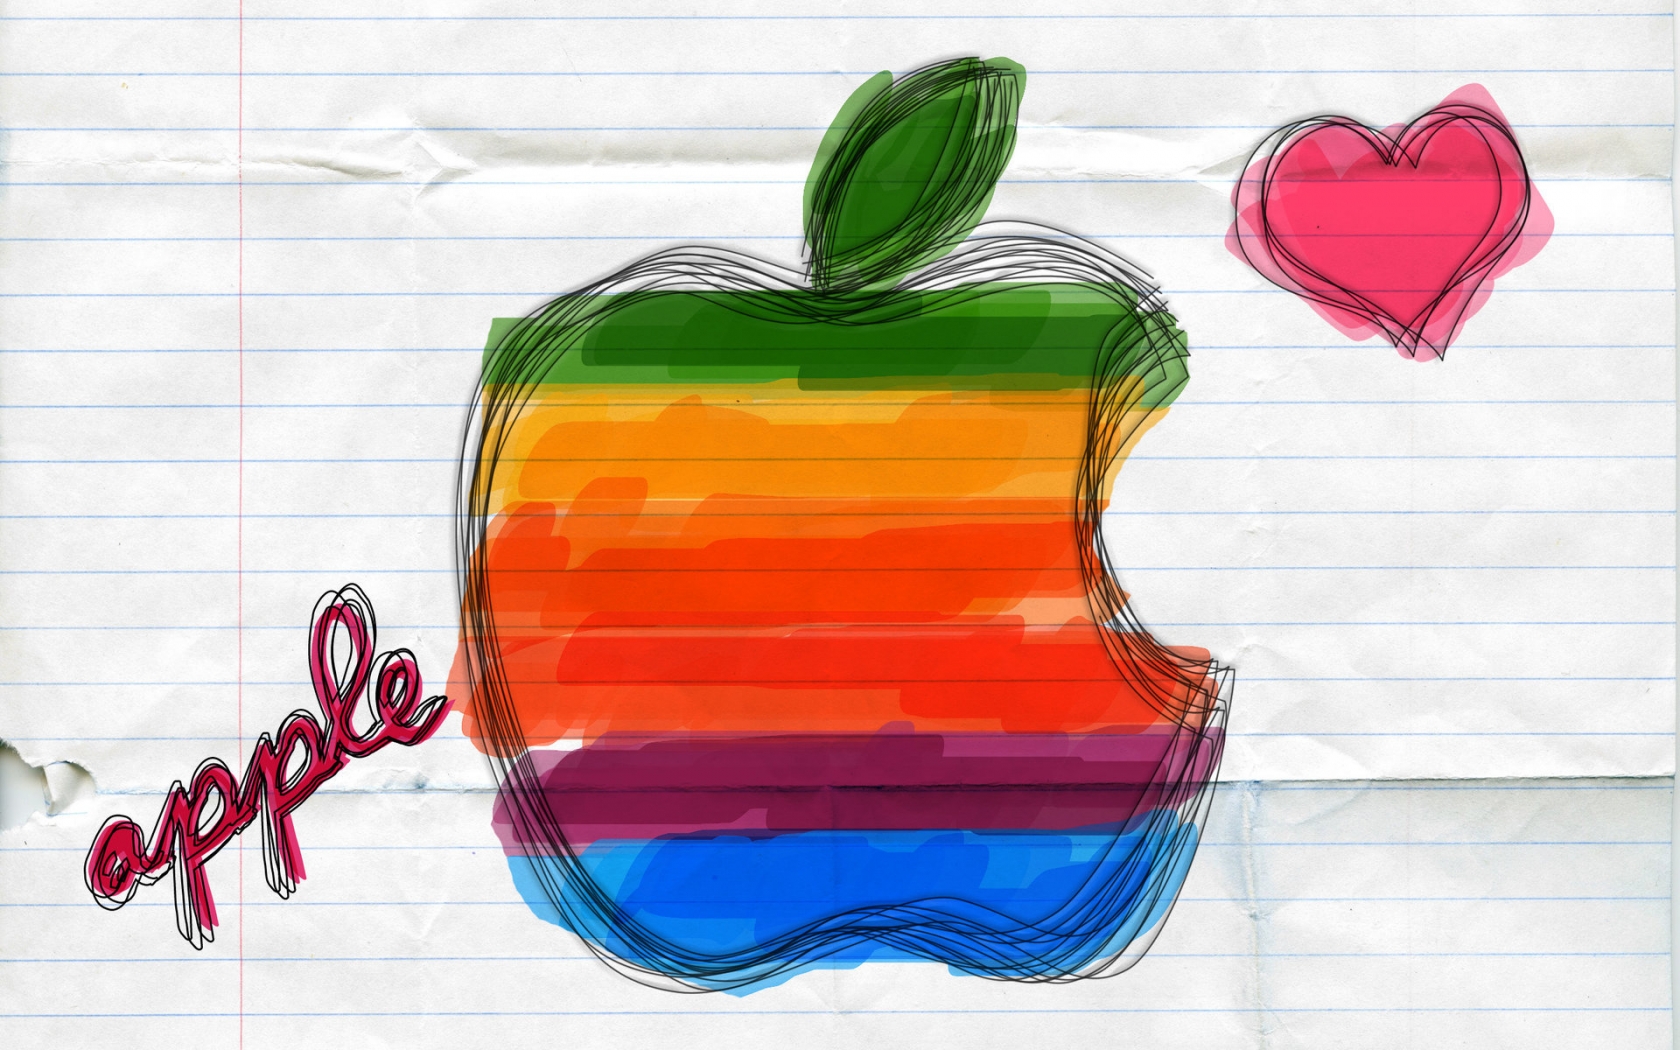 Colourful Apple logo for 1680 x 1050 widescreen resolution